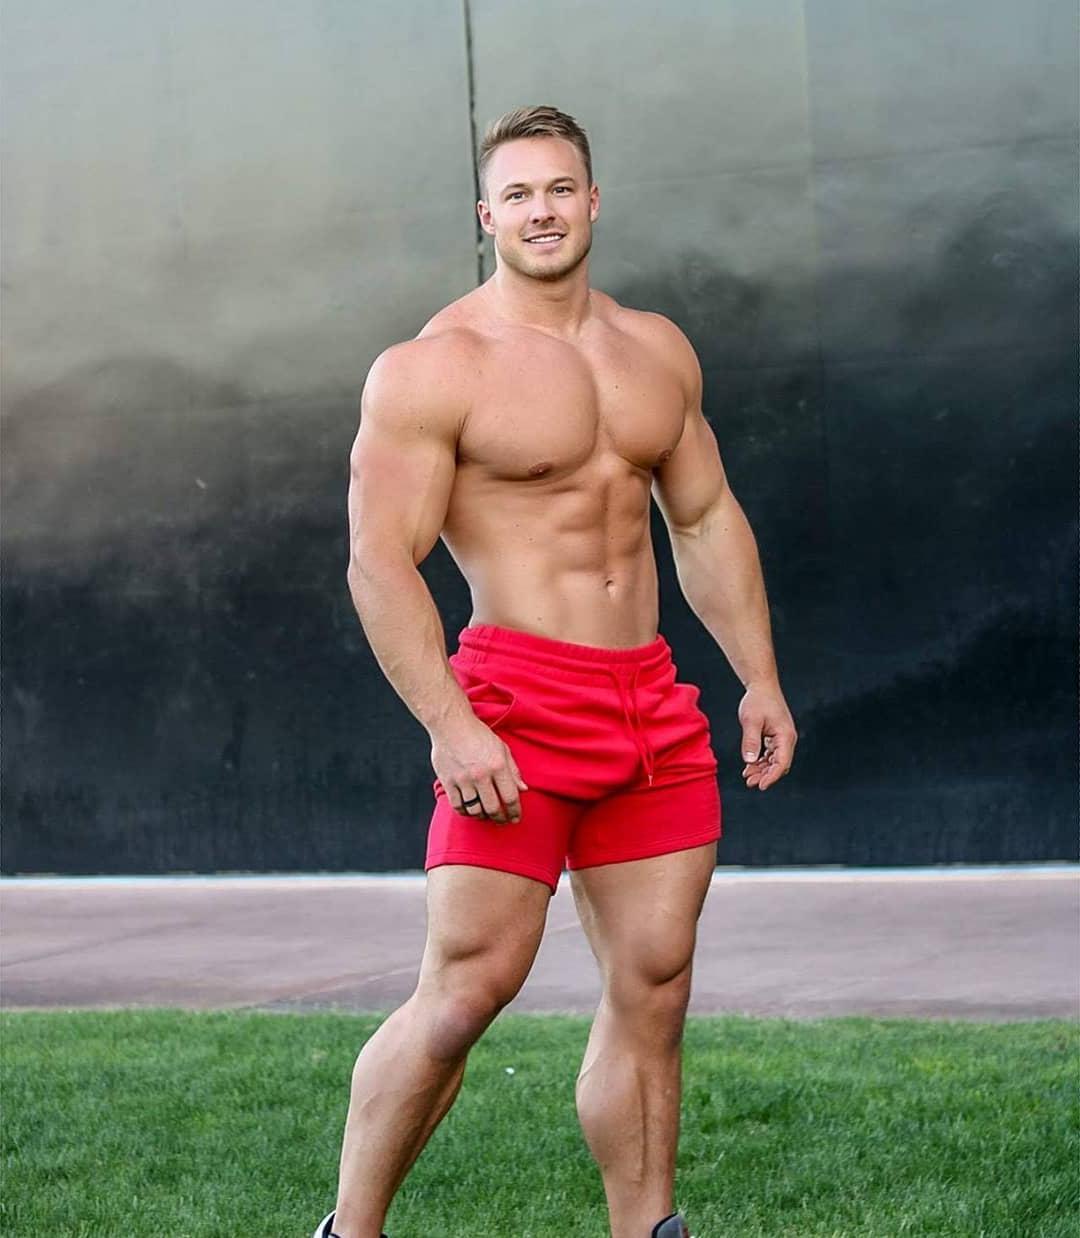 huge-muscle-daddy-bare-chest-muscle-red-shorts-blond-pecs-man